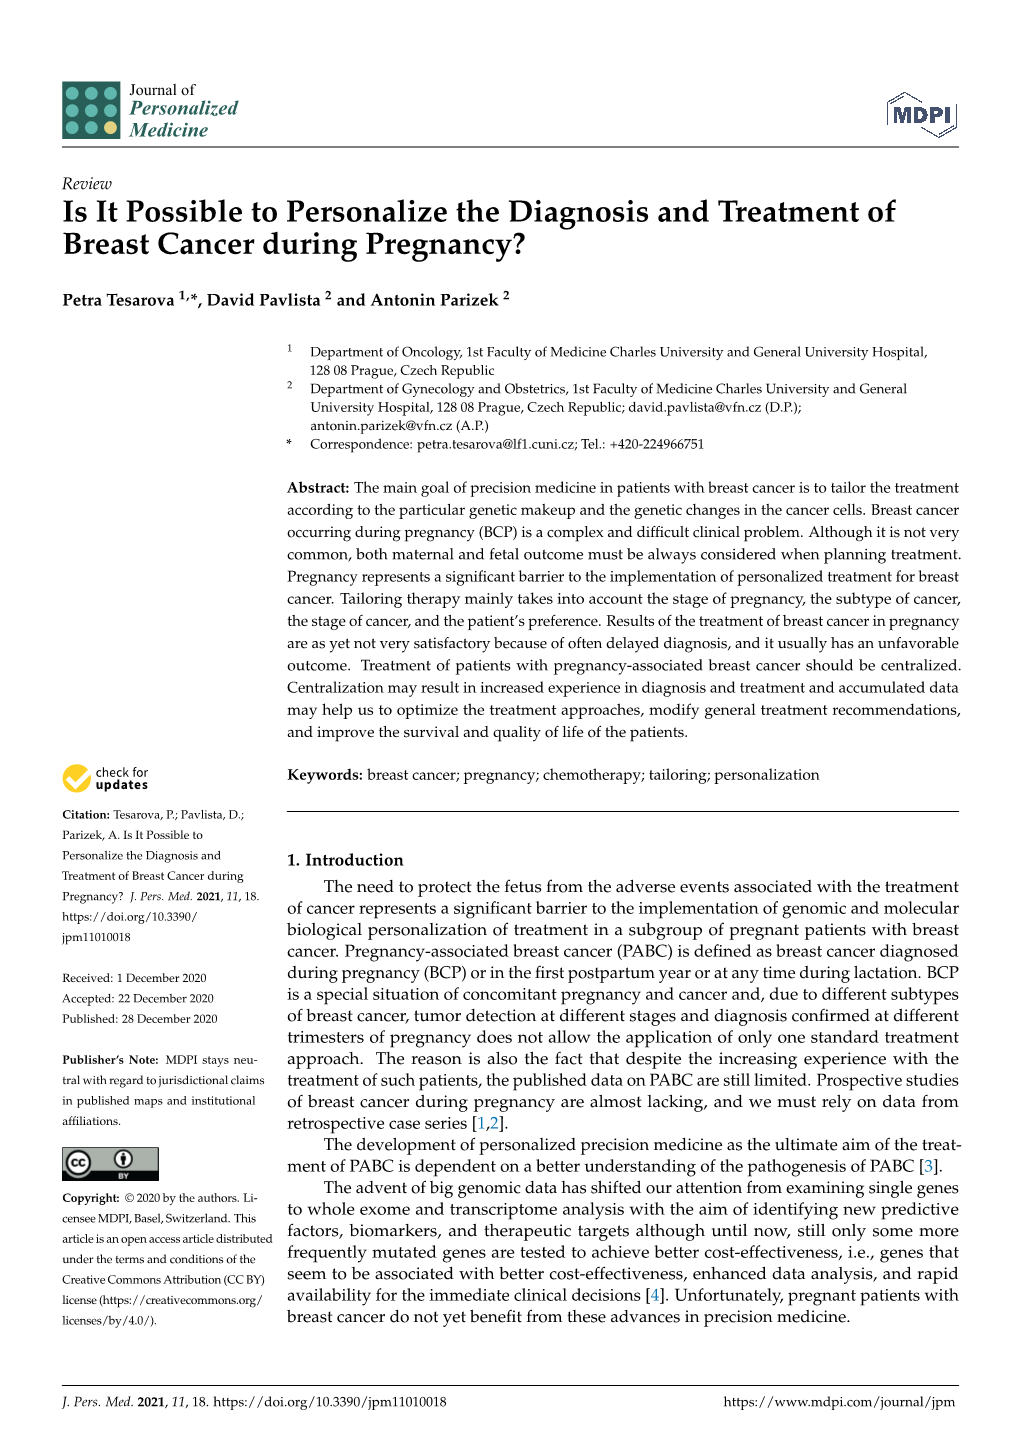 Is It Possible to Personalize the Diagnosis and Treatment of Breast Cancer During Pregnancy?